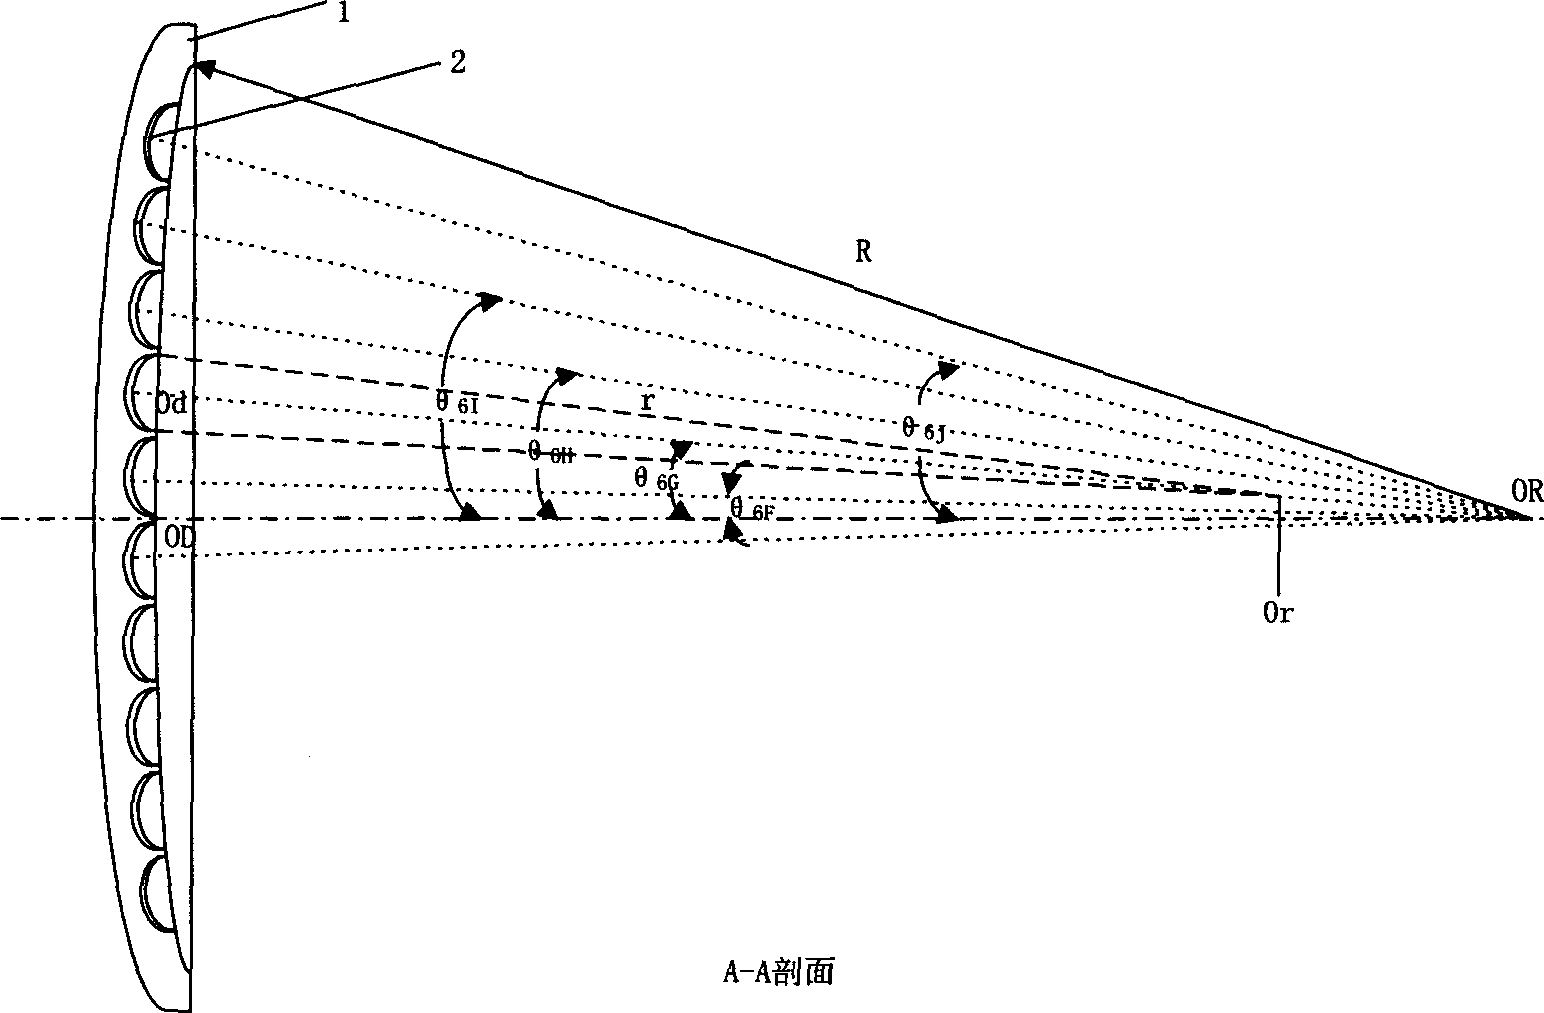 Focal domain controllable focusing supersonic transducer